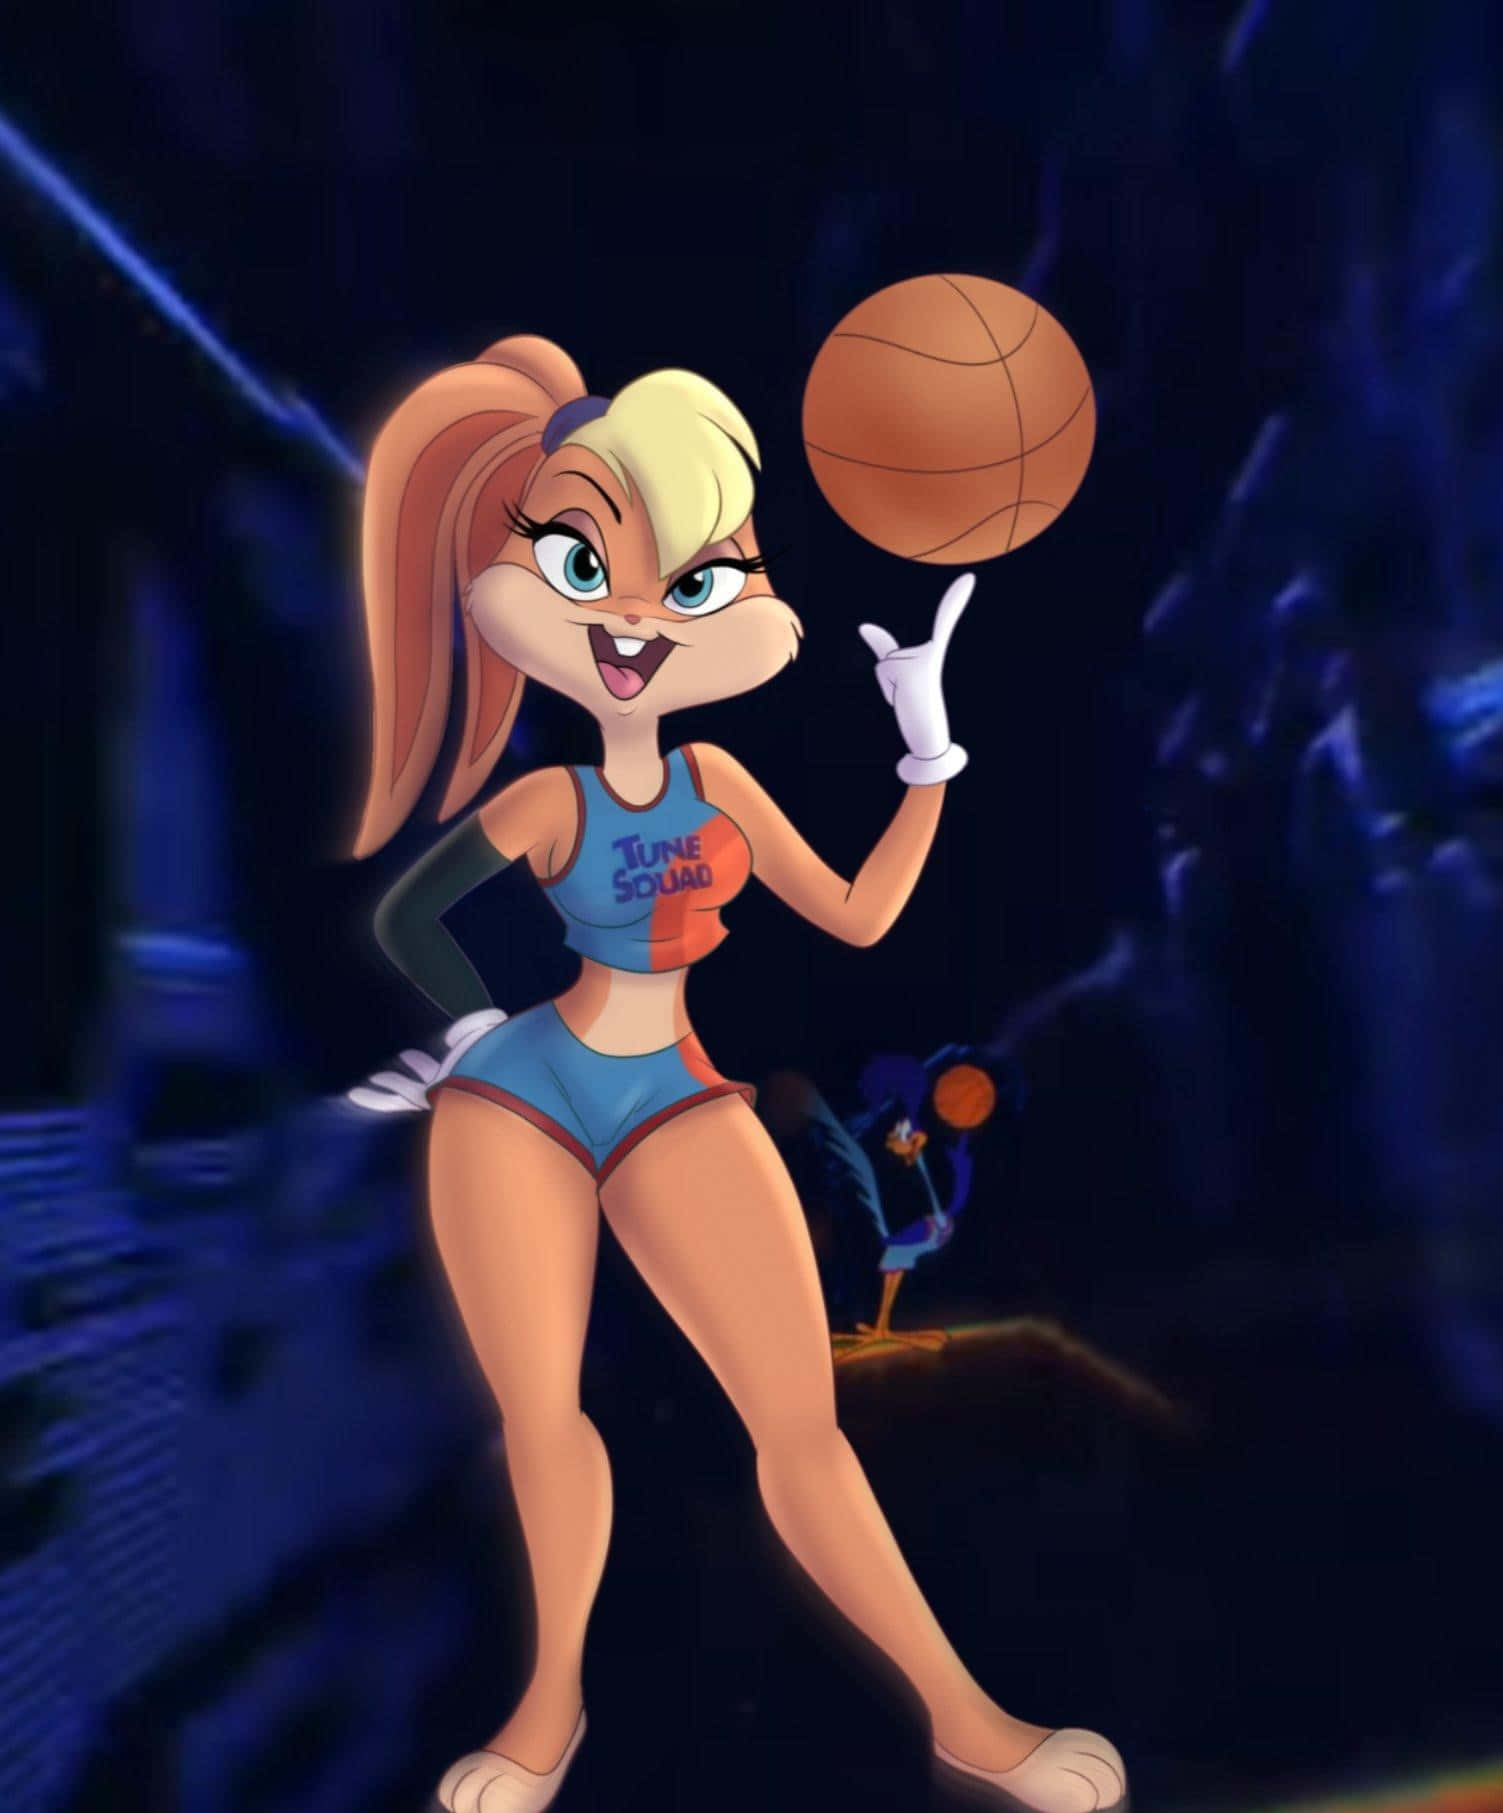 With Space Jam A New Legacy, heroines defy expectations. Wallpaper